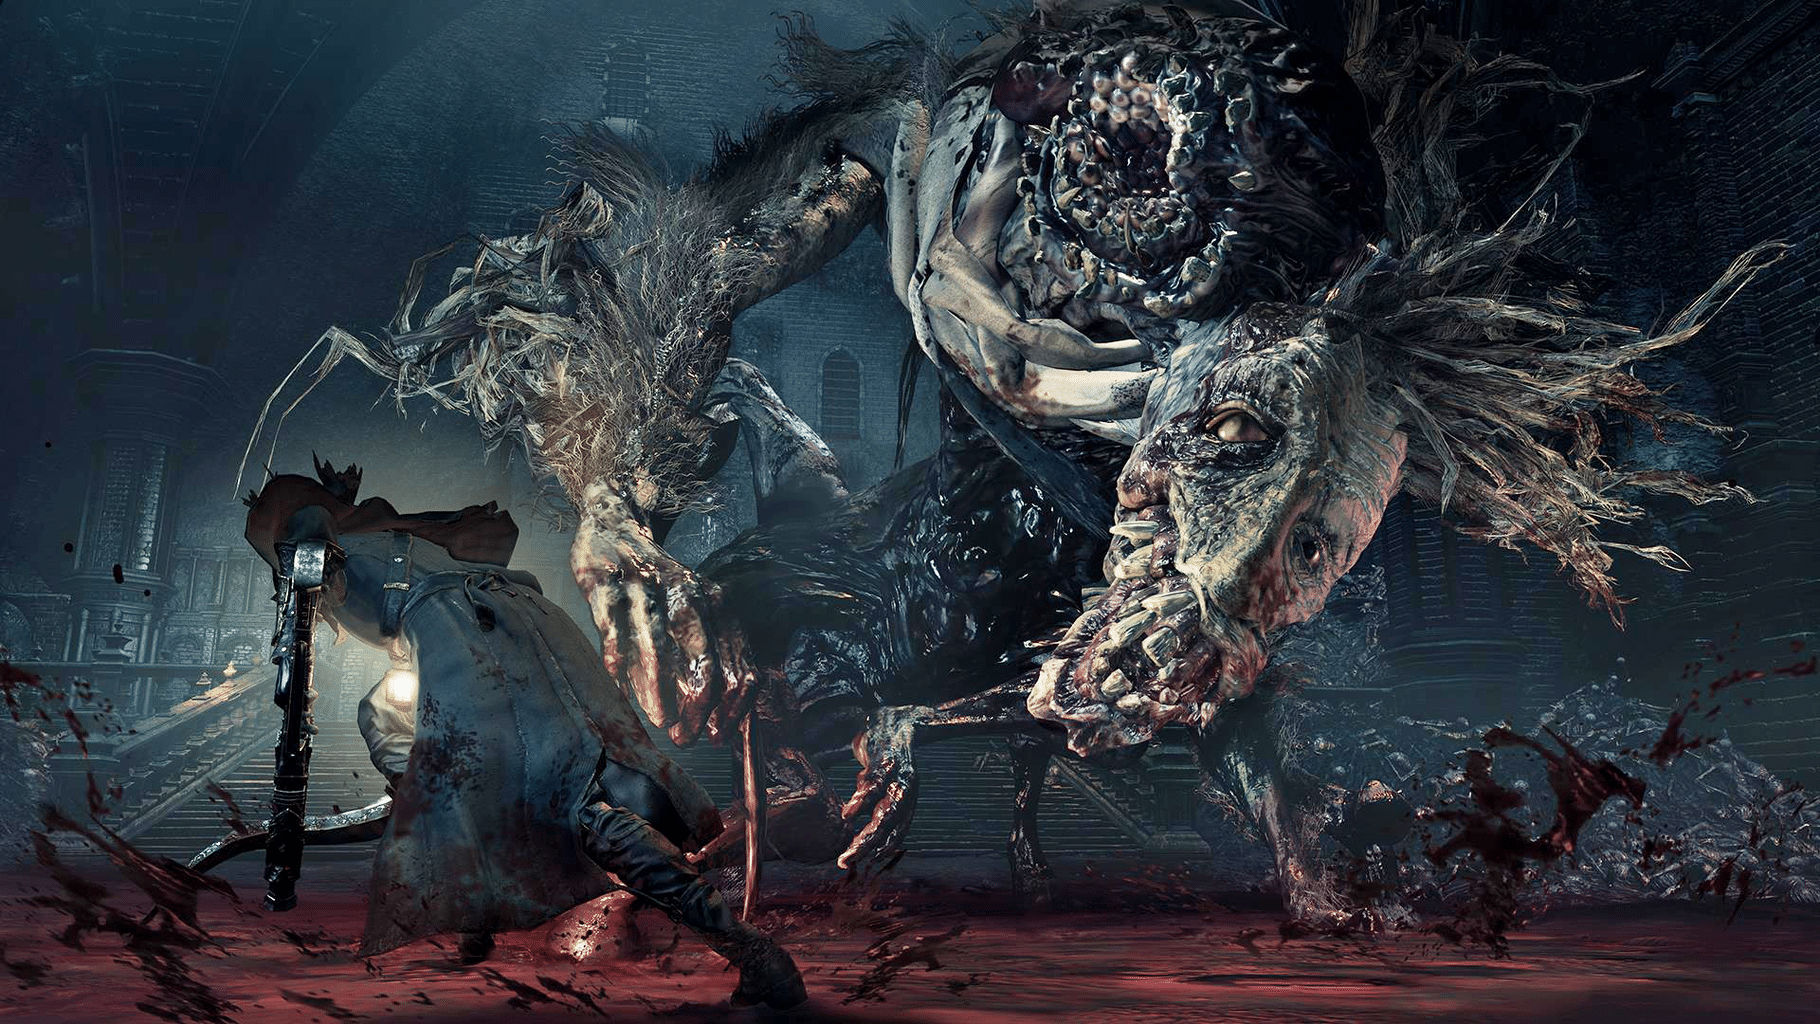 Bloodborne: The Old Hunters review – DLC completes the game of the year